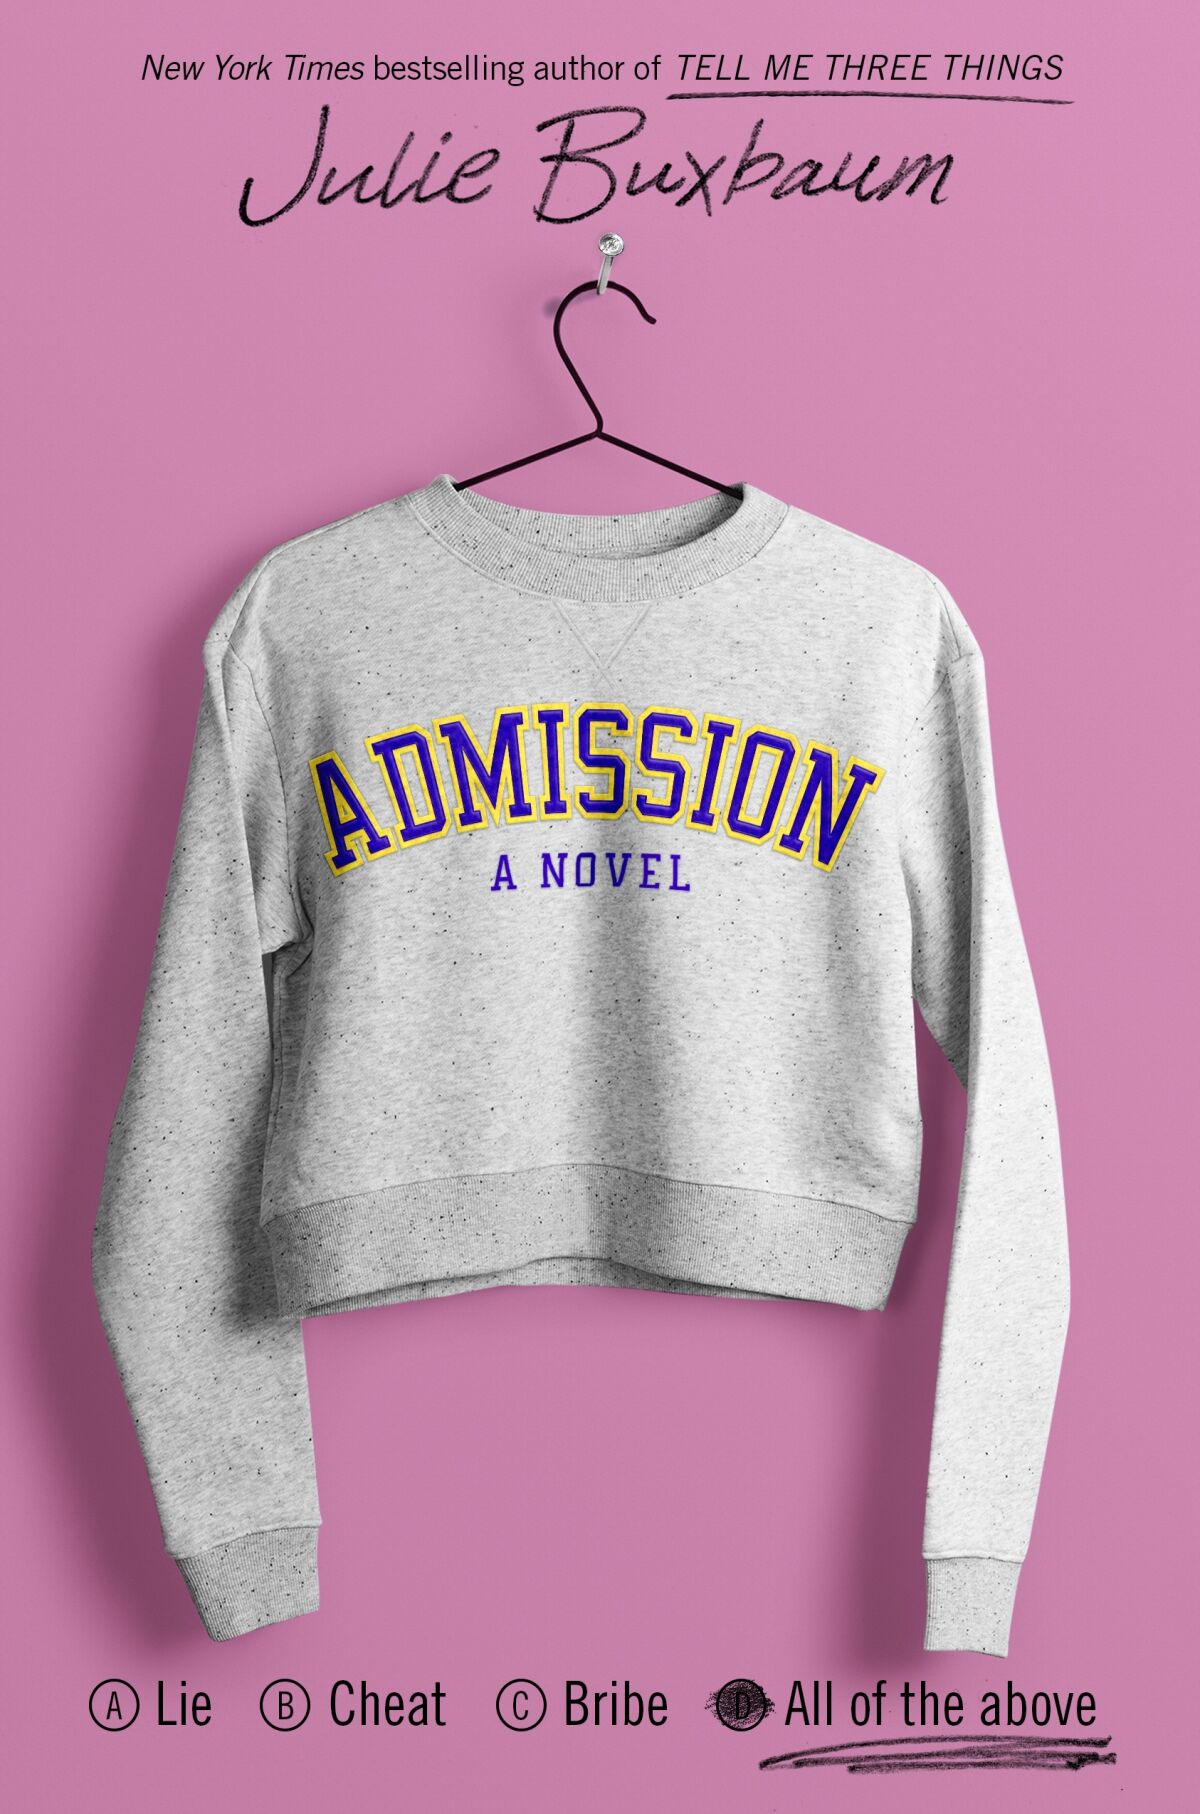 "Admission," by Julie Buxbaum.